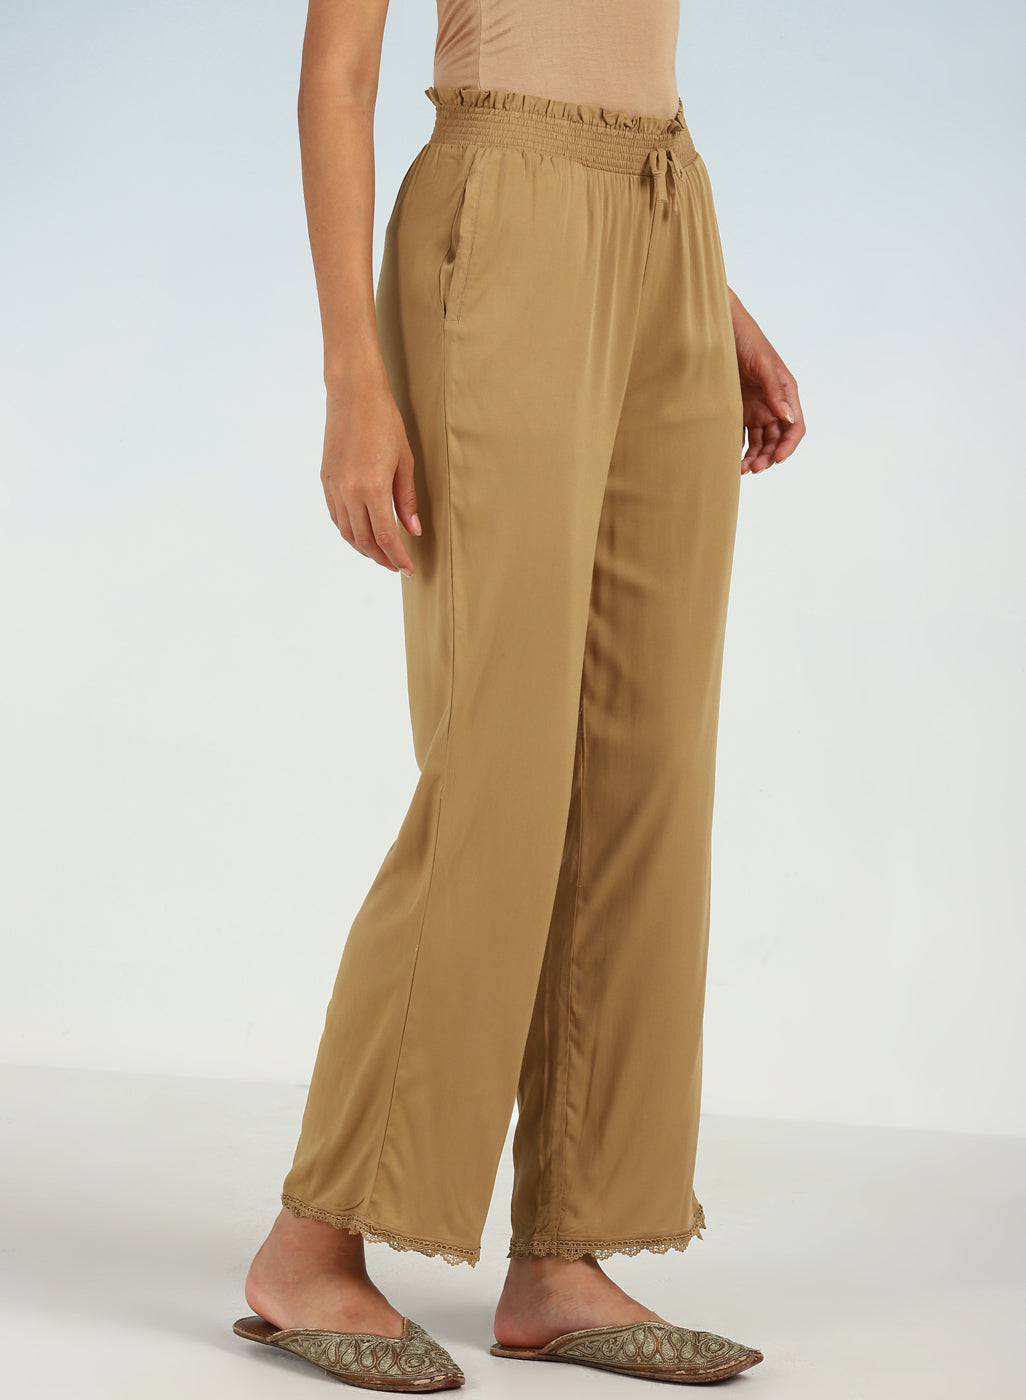 Ankle Length Pants In Rajasthan | Women Ankle Length Pants Manufacturers  Suppliers Rajasthan